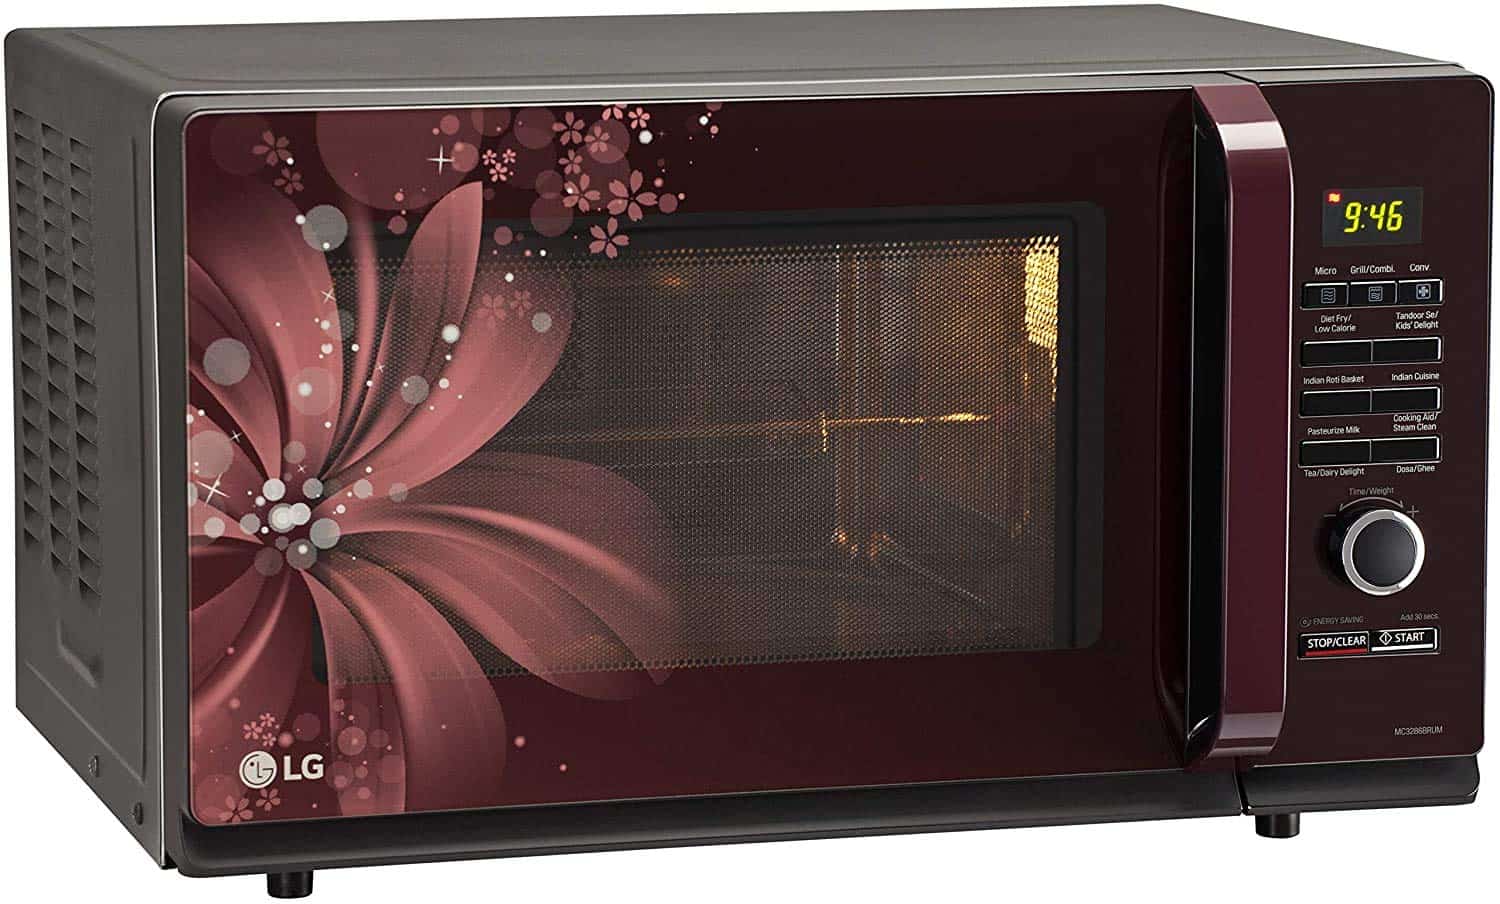 LG Convection Microwave Oven Online - MC3286BRUM